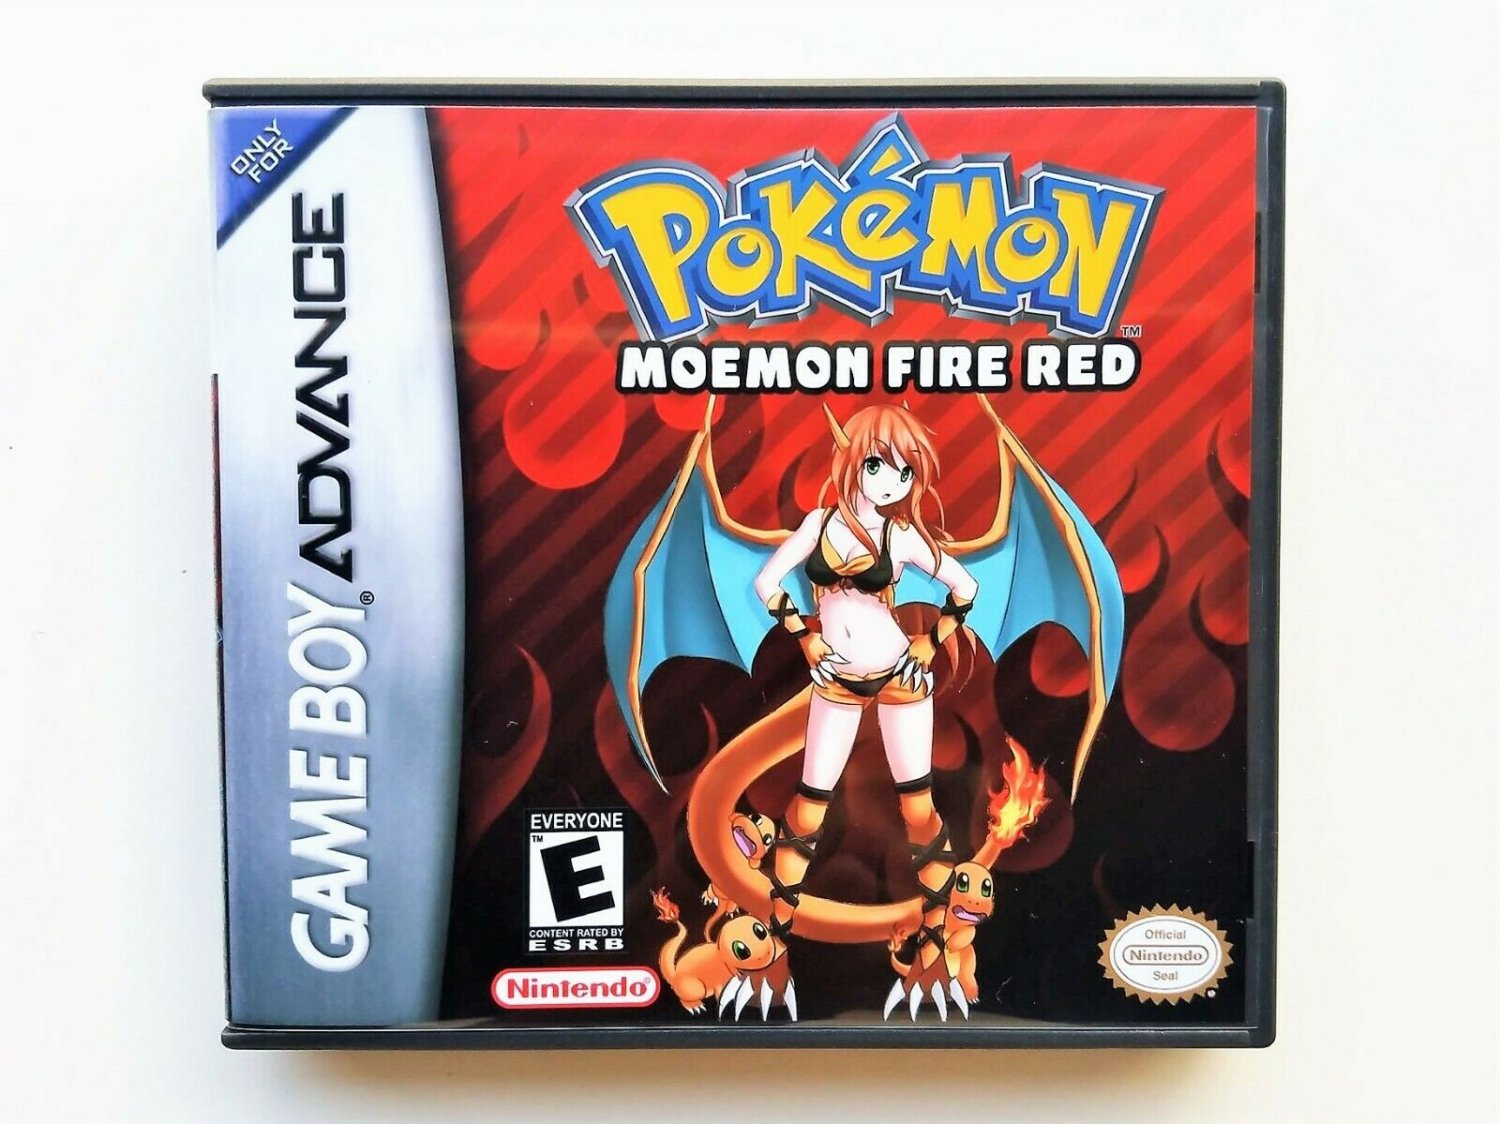 Pokemon Moemon Fire Red Game / Case - GBA Gameboy Advance Anime Fan Made Mo...